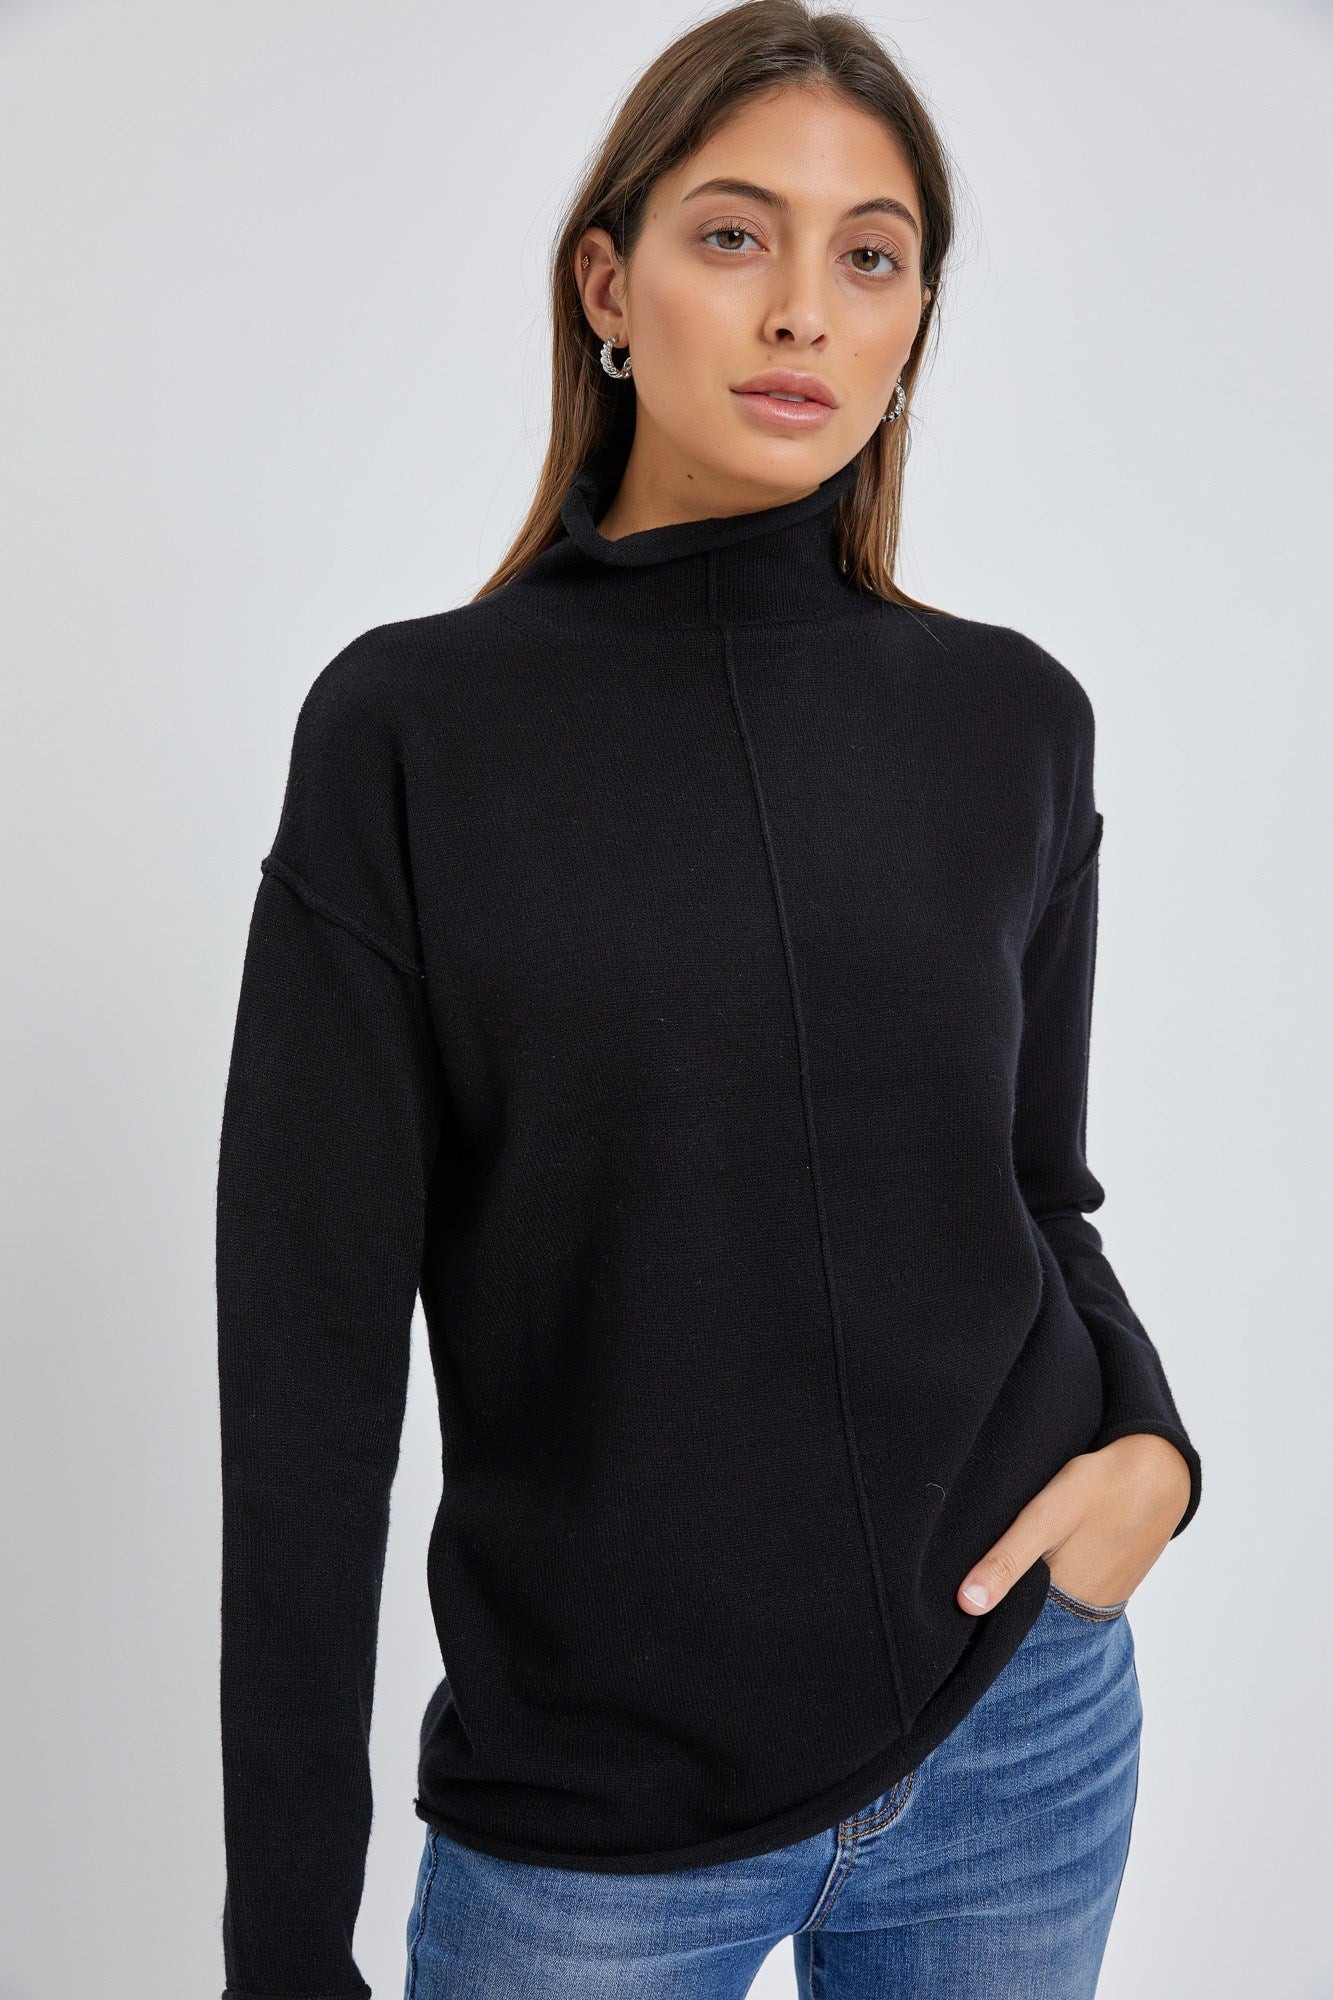 The Halle Sweater